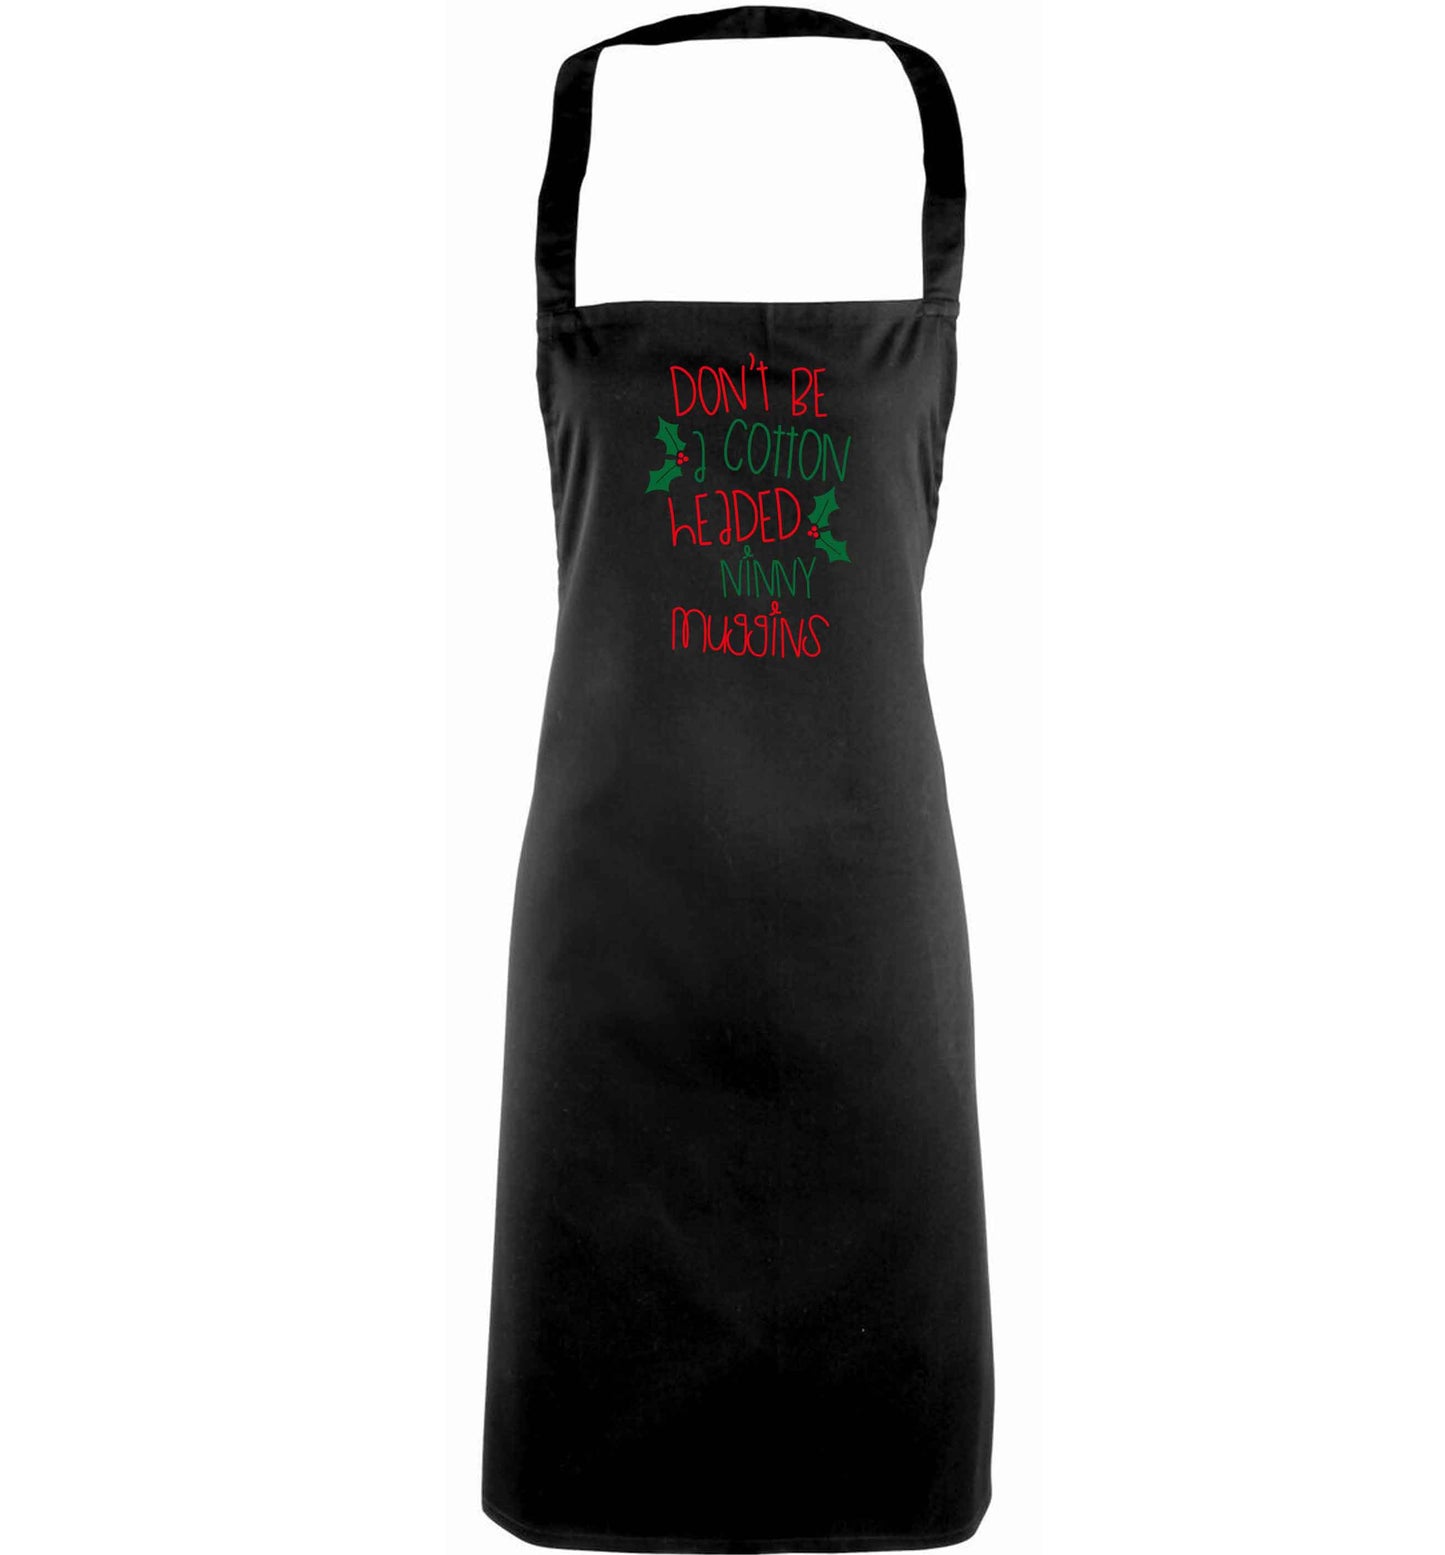 Too Late to be Good adults black apron